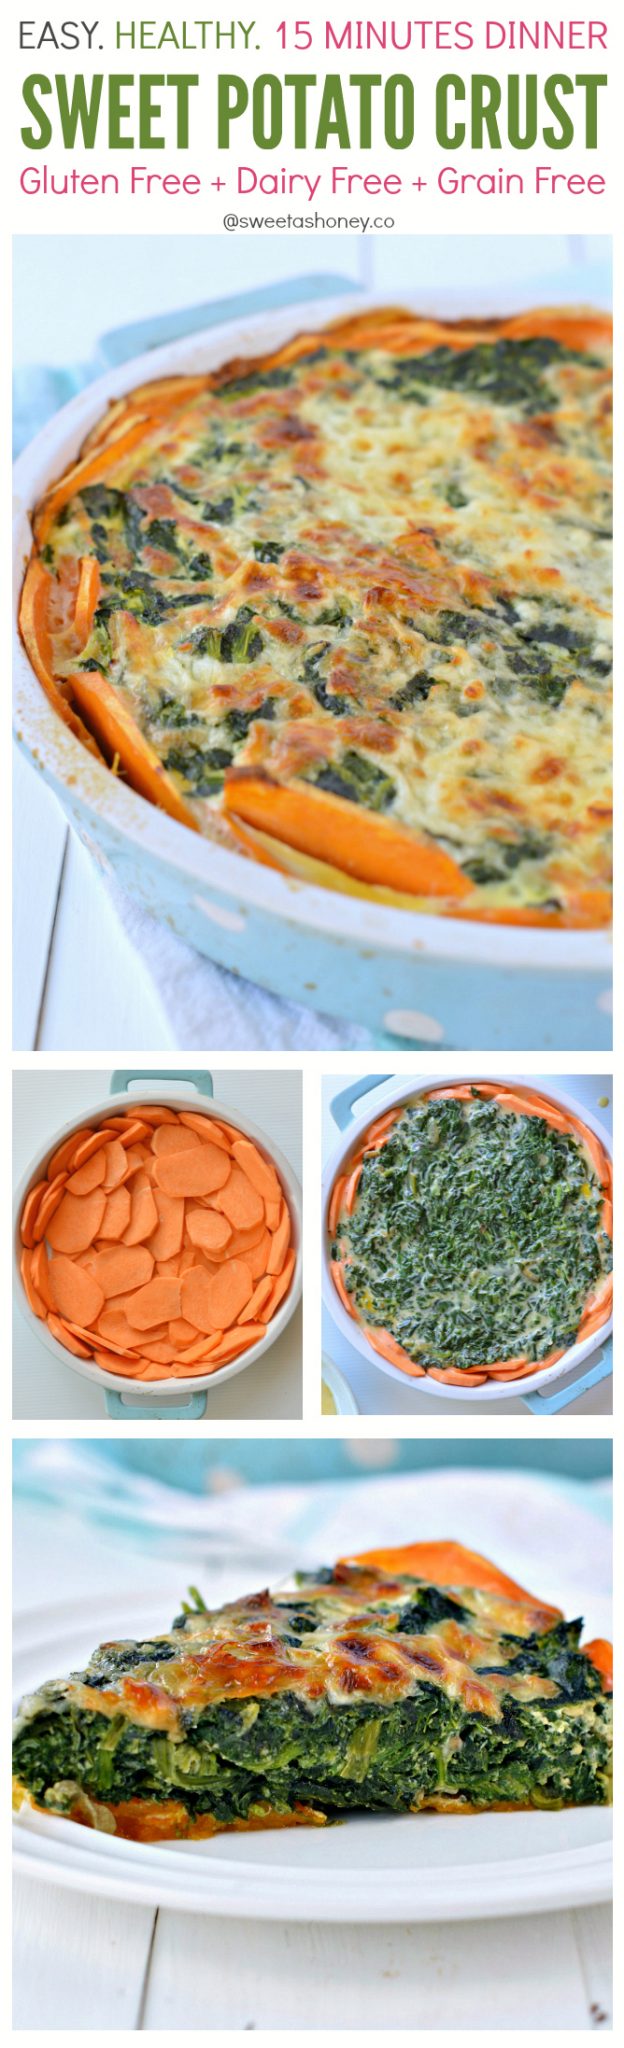 Healthy Sweet Potato Crust. A crustless paleo spinach quiche recipe perfect to incorporate into your whole30 plan. Dairy free as